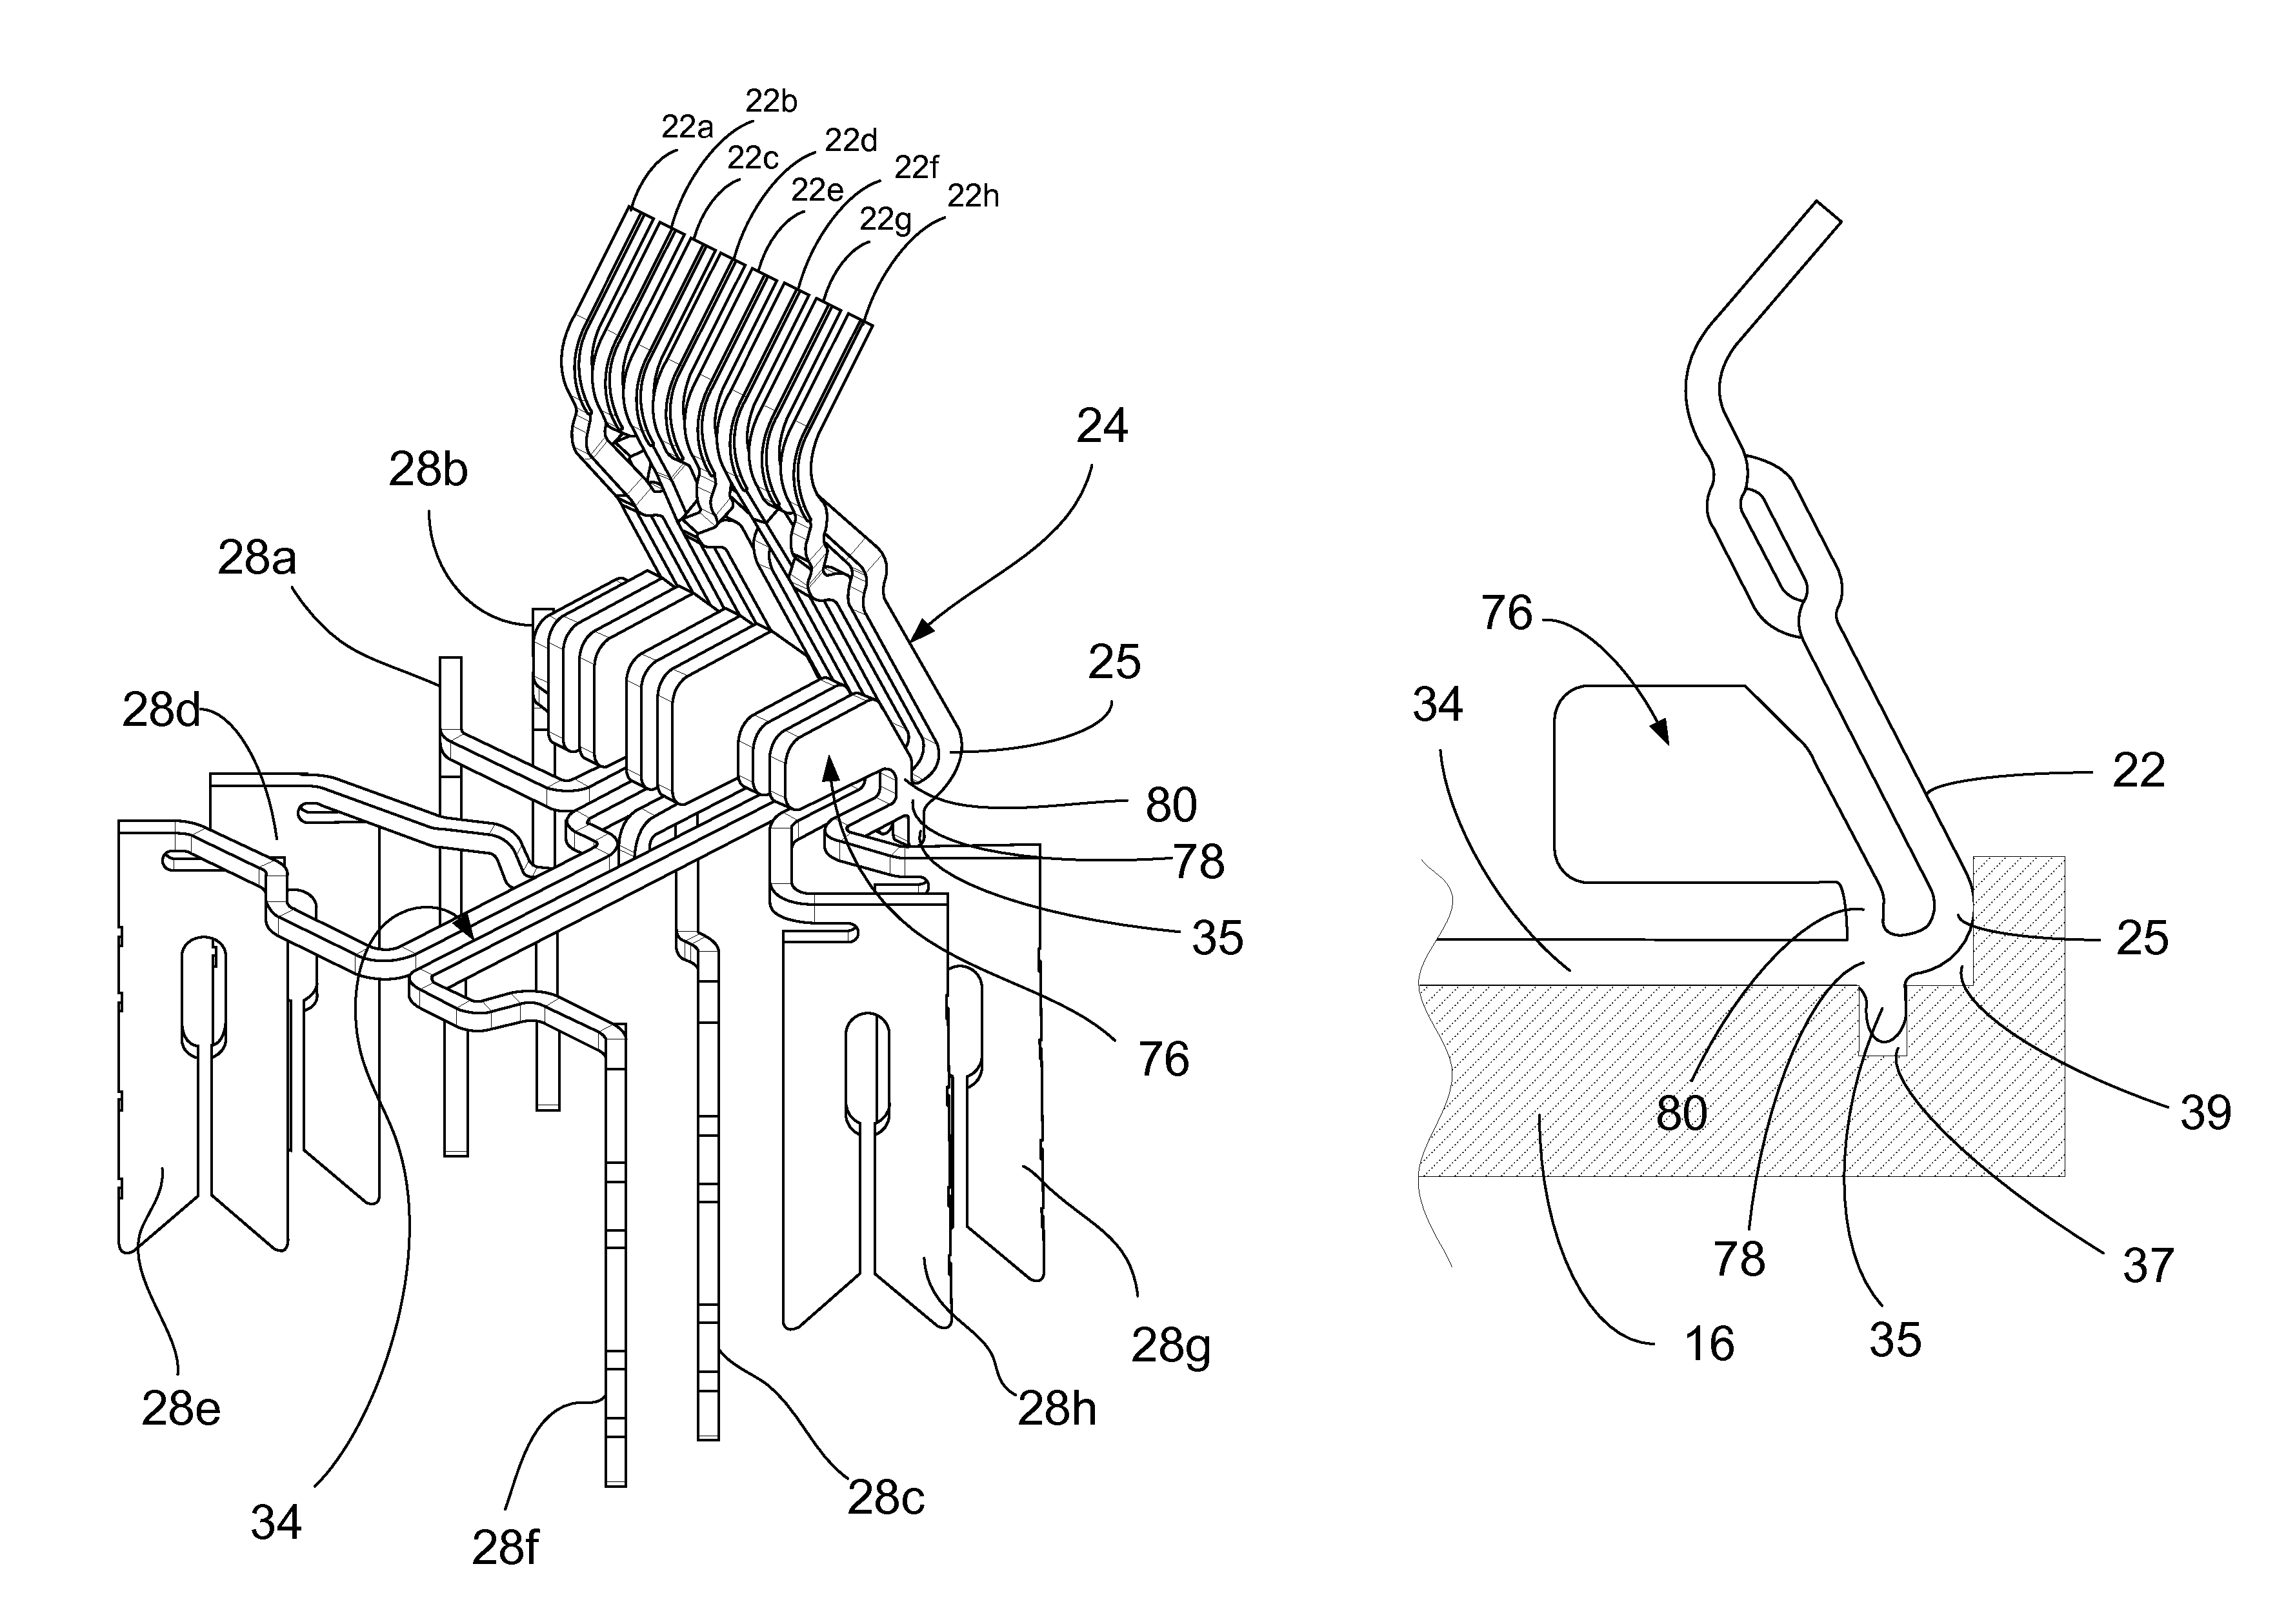 Electrical connector with a plurality of capacitive plates